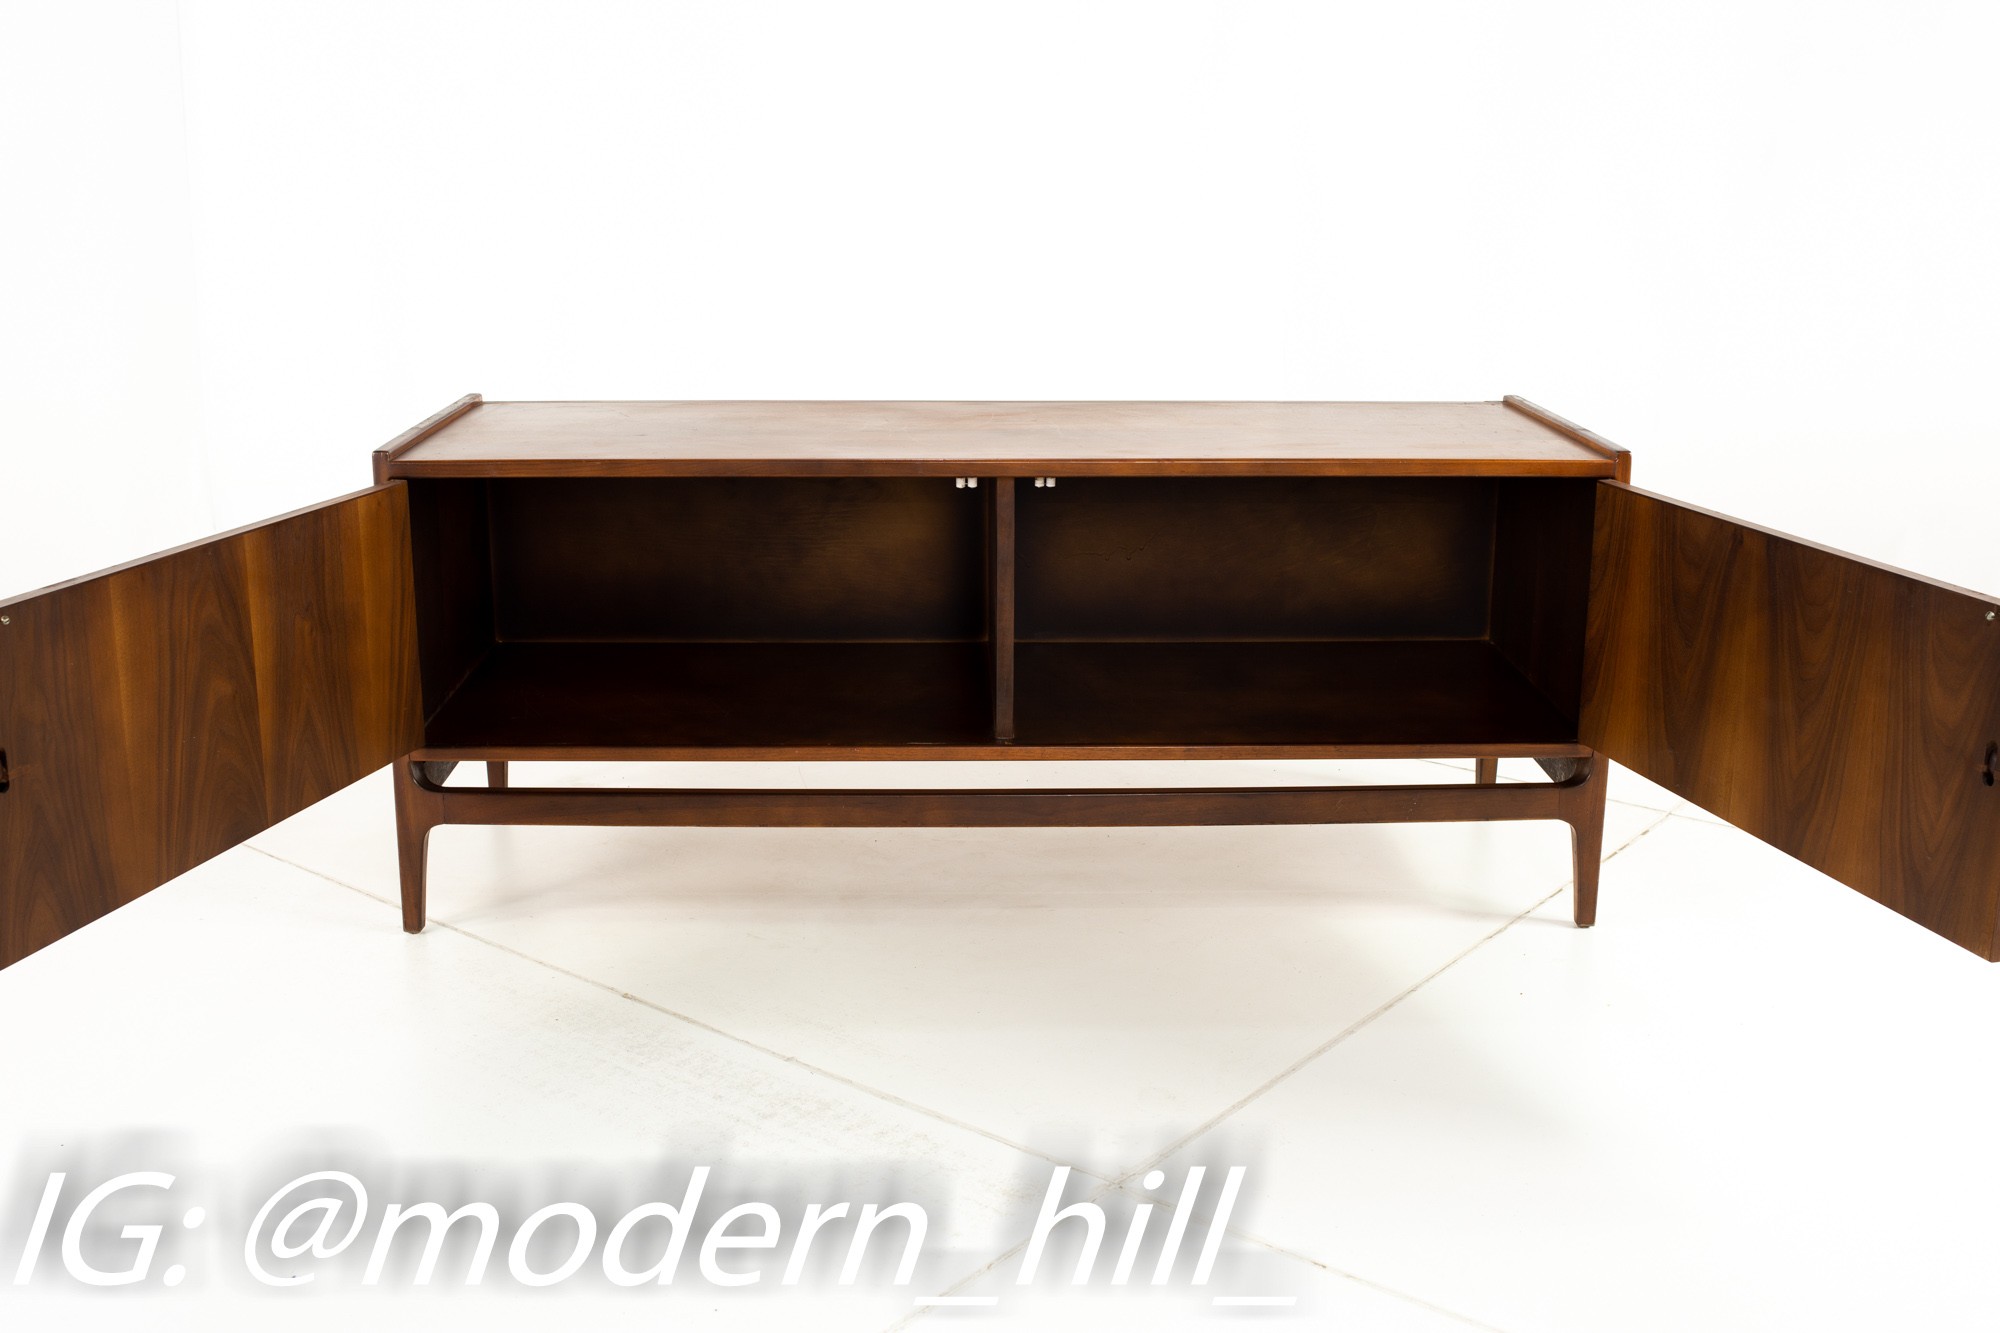 Richard Thompson for Glenn of California Mid Century Sideboard Credenza Buffet and Hutch Display Cabinet